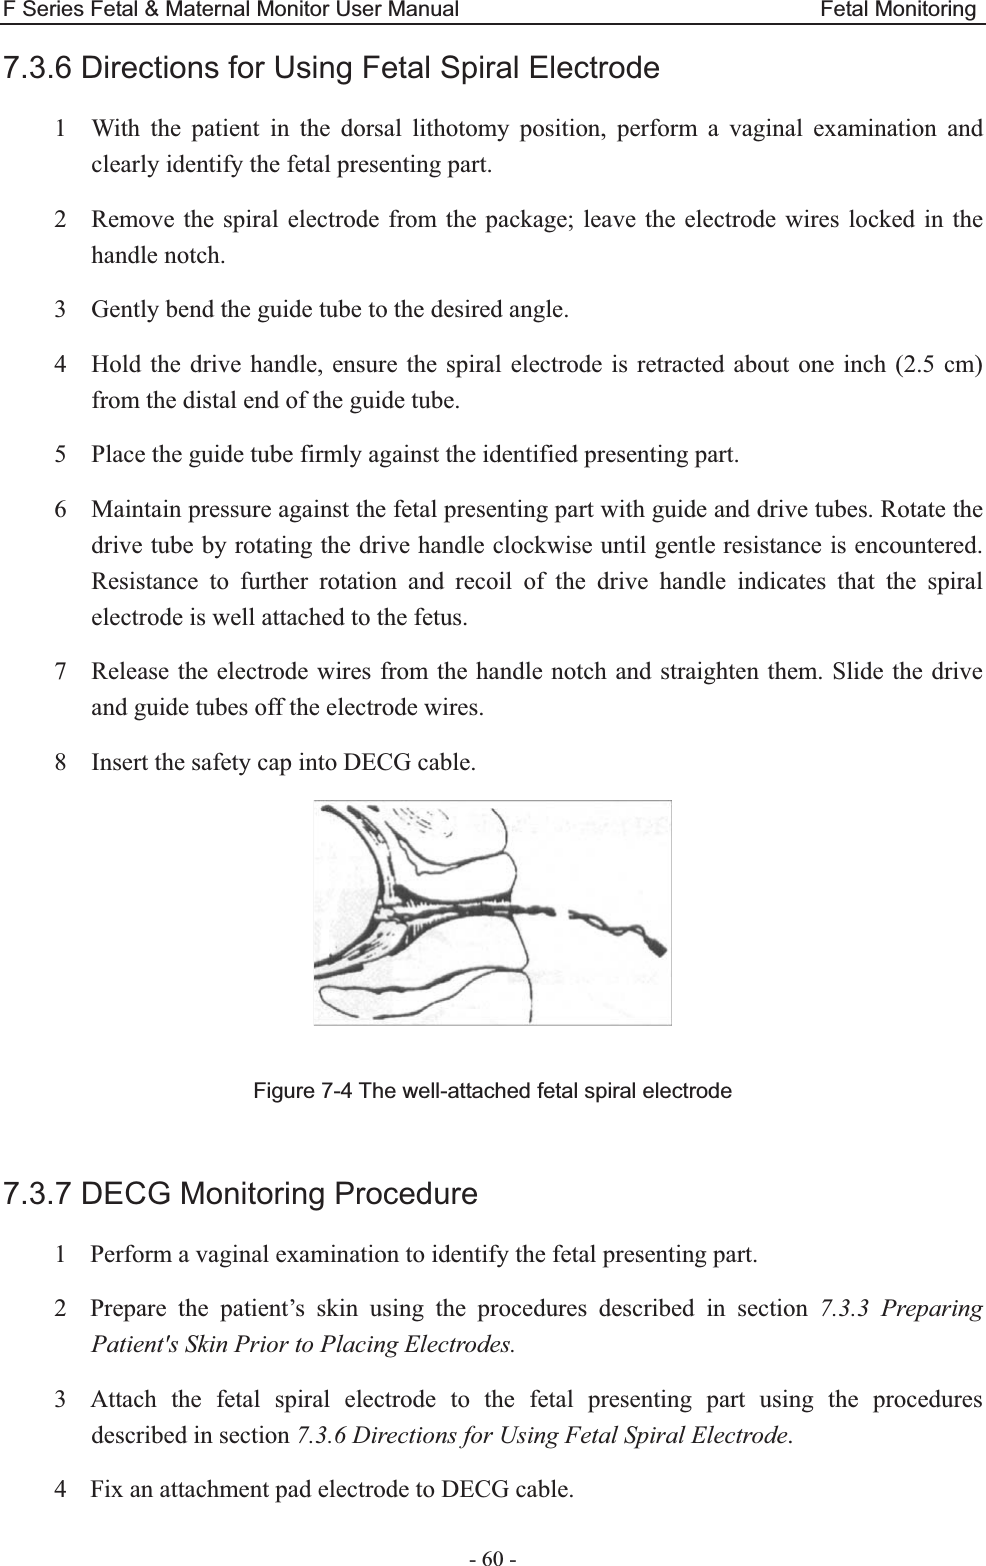 F Series Fetal &amp; Maternal Monitor User Manual                                 Fetal Monitoring - 60 - 7.3.6 Directions for Using Fetal Spiral Electrode 1 With the patient in the dorsal lithotomy position, perform a vaginal examination and clearly identify the fetal presenting part. 2 Remove the spiral electrode from the package; leave the electrode wires locked in the handle notch. 3 Gently bend the guide tube to the desired angle. 4 Hold the drive handle, ensure the spiral electrode is retracted about one inch (2.5 cm) from the distal end of the guide tube. 5 Place the guide tube firmly against the identified presenting part. 6 Maintain pressure against the fetal presenting part with guide and drive tubes. Rotate the drive tube by rotating the drive handle clockwise until gentle resistance is encountered. Resistance to further rotation and recoil of the drive handle indicates that the spiral electrode is well attached to the fetus. 7 Release the electrode wires from the handle notch and straighten them. Slide the drive and guide tubes off the electrode wires. 8 Insert the safety cap into DECG cable.   Figure 7-4 The well-attached fetal spiral electrode  7.3.7 DECG Monitoring Procedure 1 Perform a vaginal examination to identify the fetal presenting part. 2 Prepare the patient’s skin using the procedures described in section 7.3.3 Preparing Patient&apos;s Skin Prior to Placing Electrodes. 3 Attach the fetal spiral electrode to the fetal presenting part using the procedures described in section 7.3.6 Directions for Using Fetal Spiral Electrode. 4 Fix an attachment pad electrode to DECG cable. 